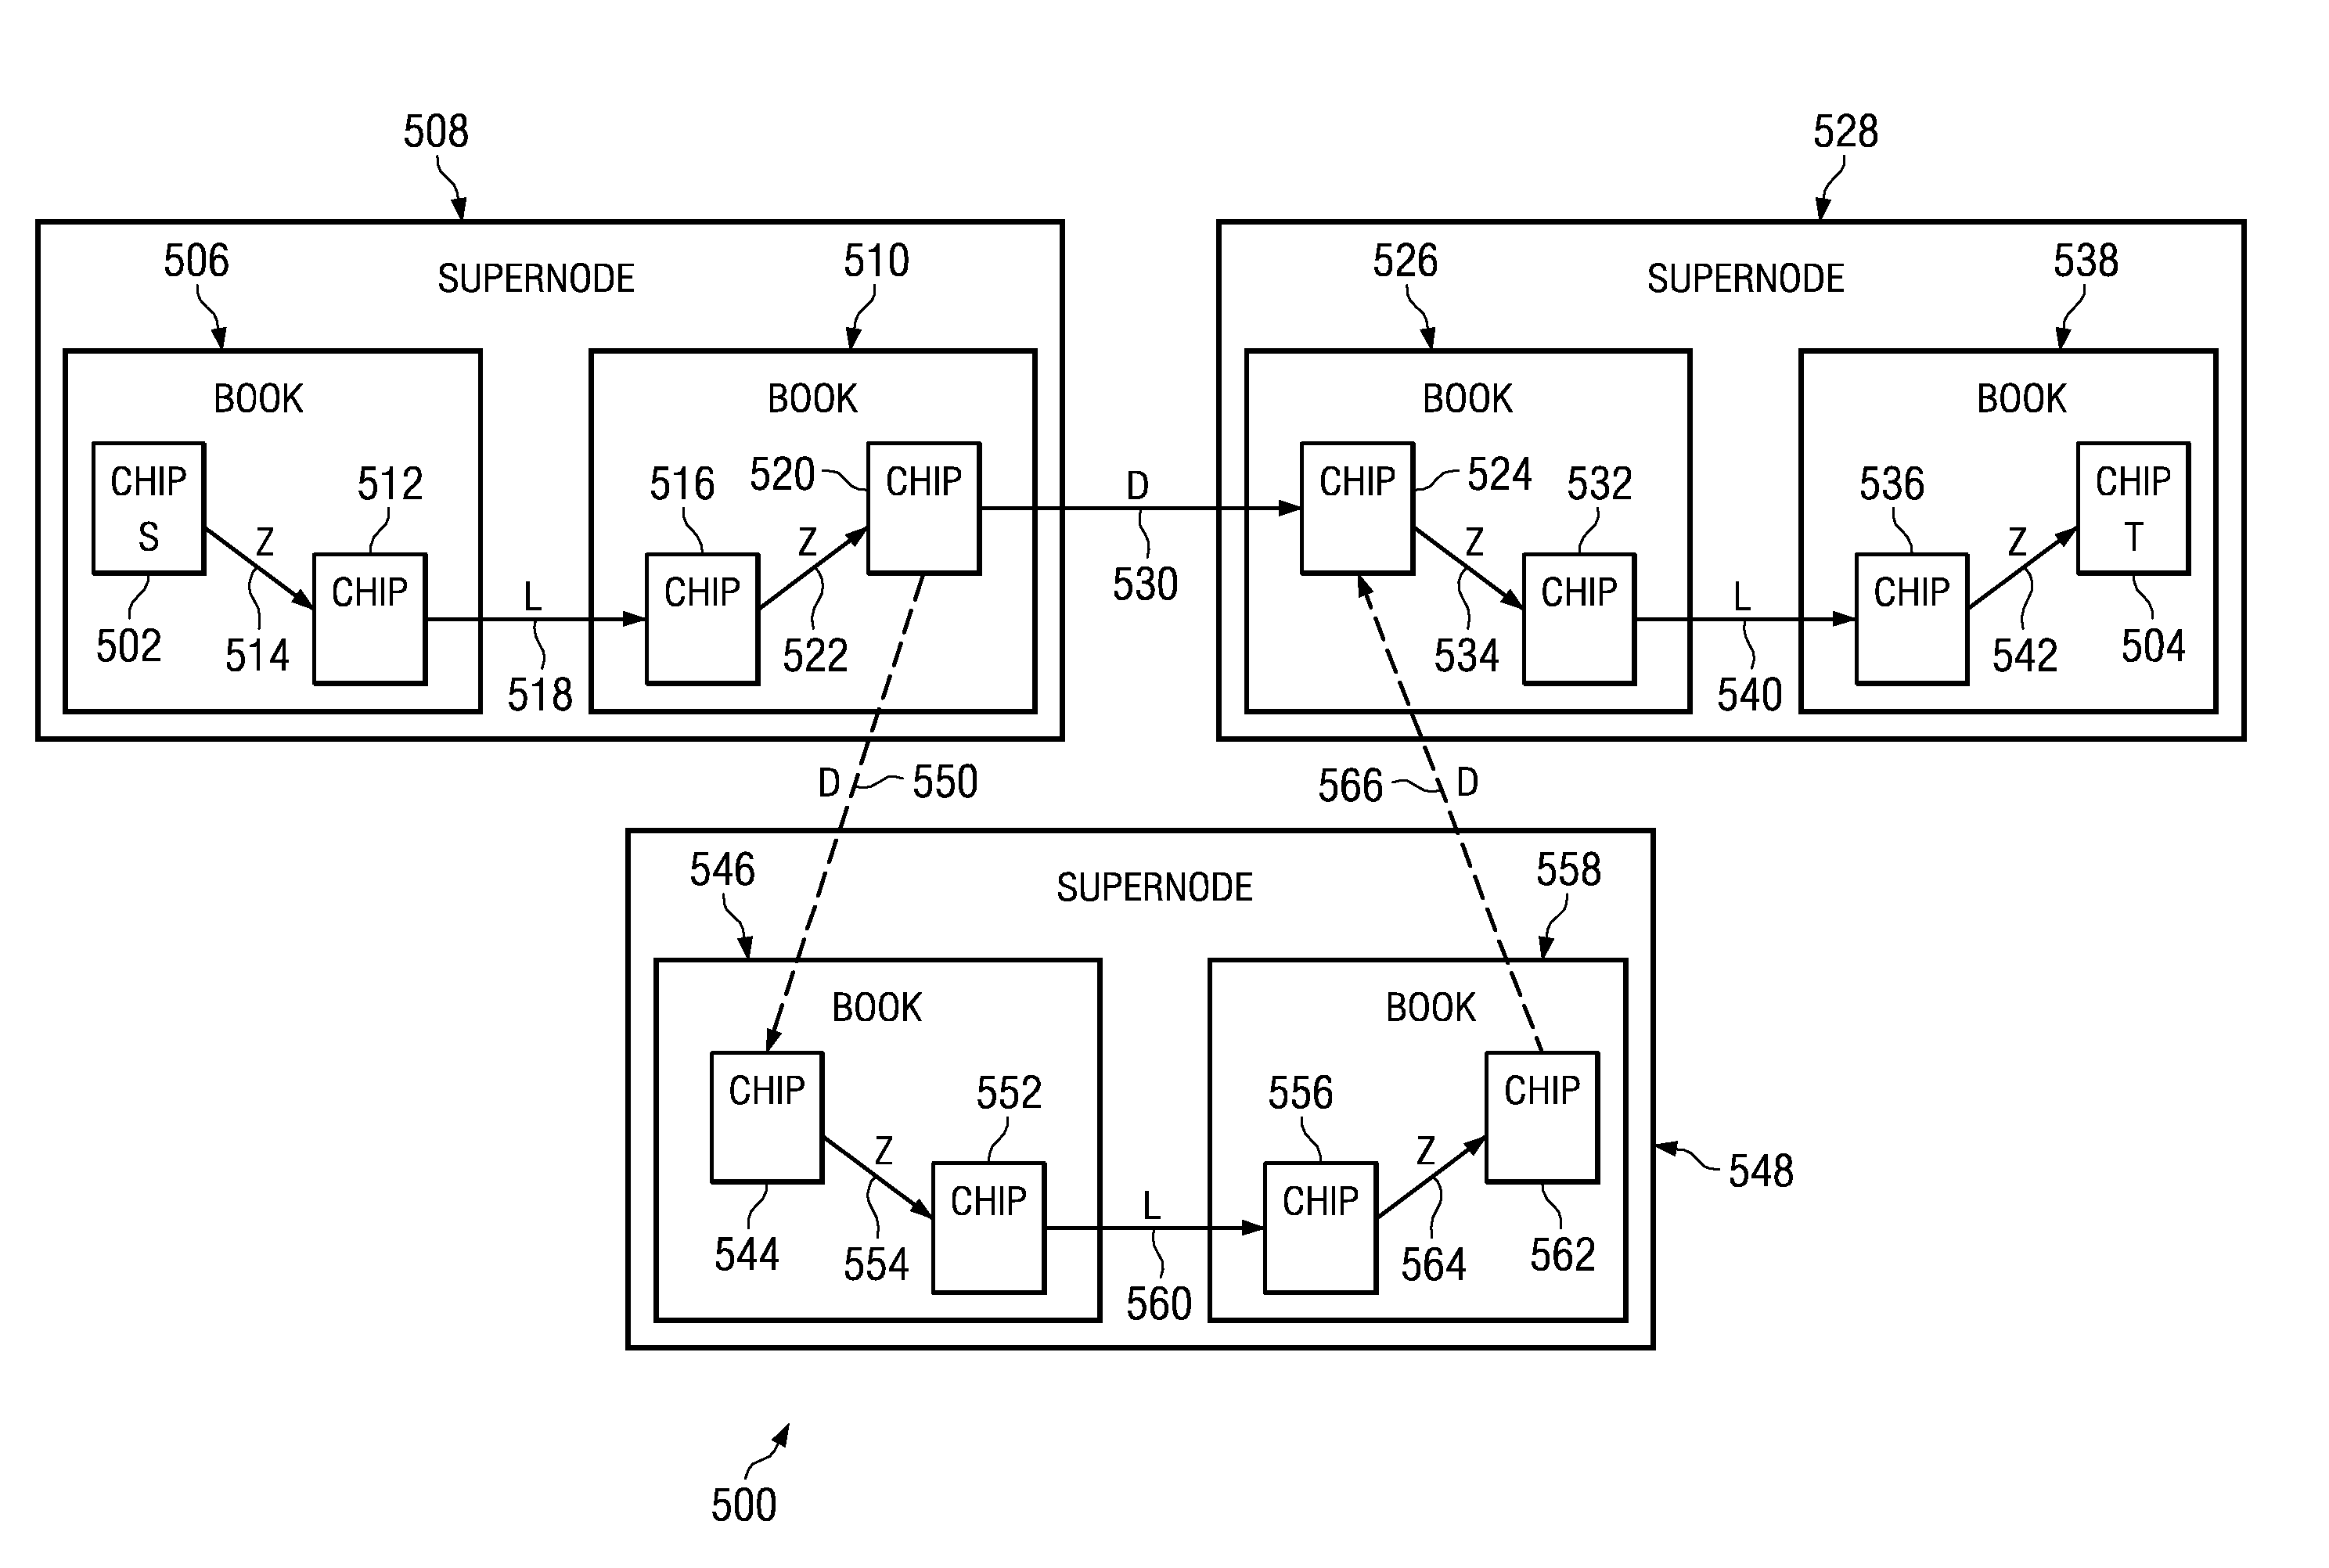 System for Data Processing Using a Multi-Tiered Full-Graph Interconnect Architecture